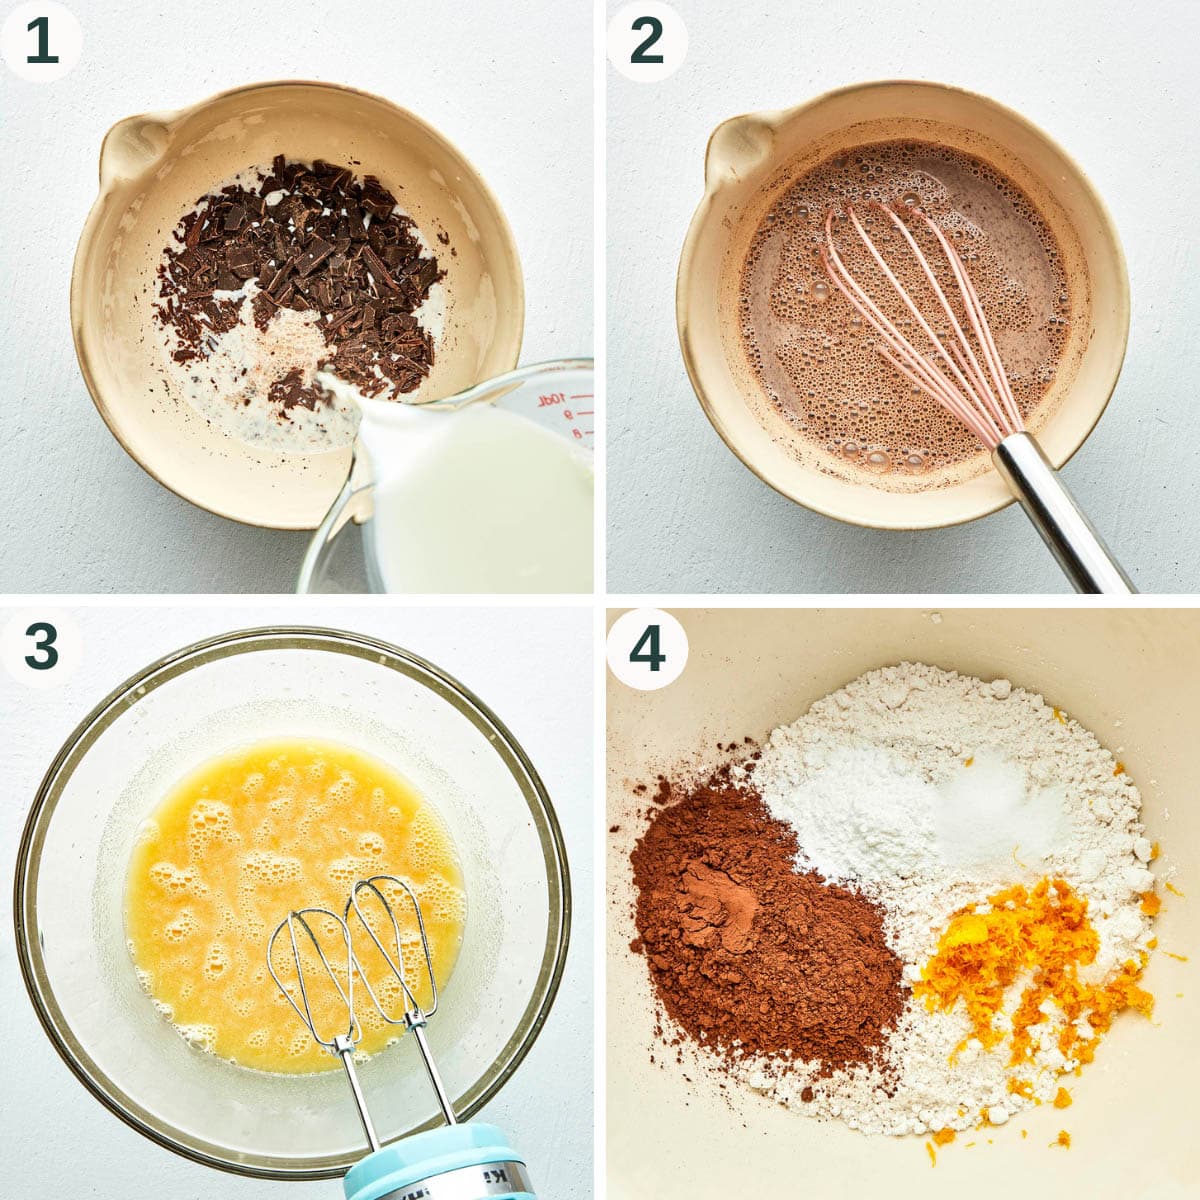 Chocolate cake steps 1 to 4, mixing dry and wet ingredients.